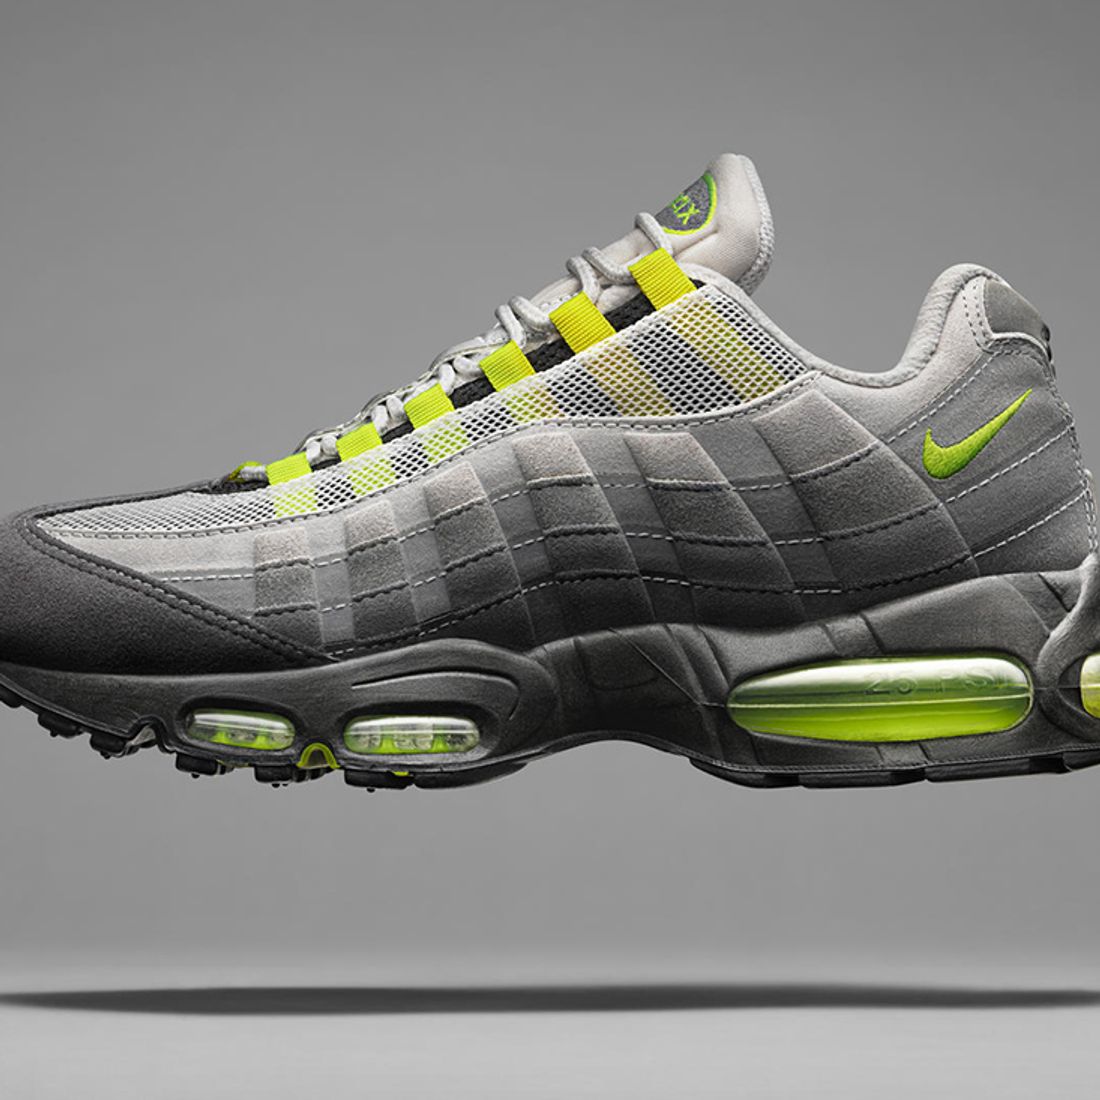 The All-Time Greatest Nike Air Max 95s: Part Sneaker Freaker